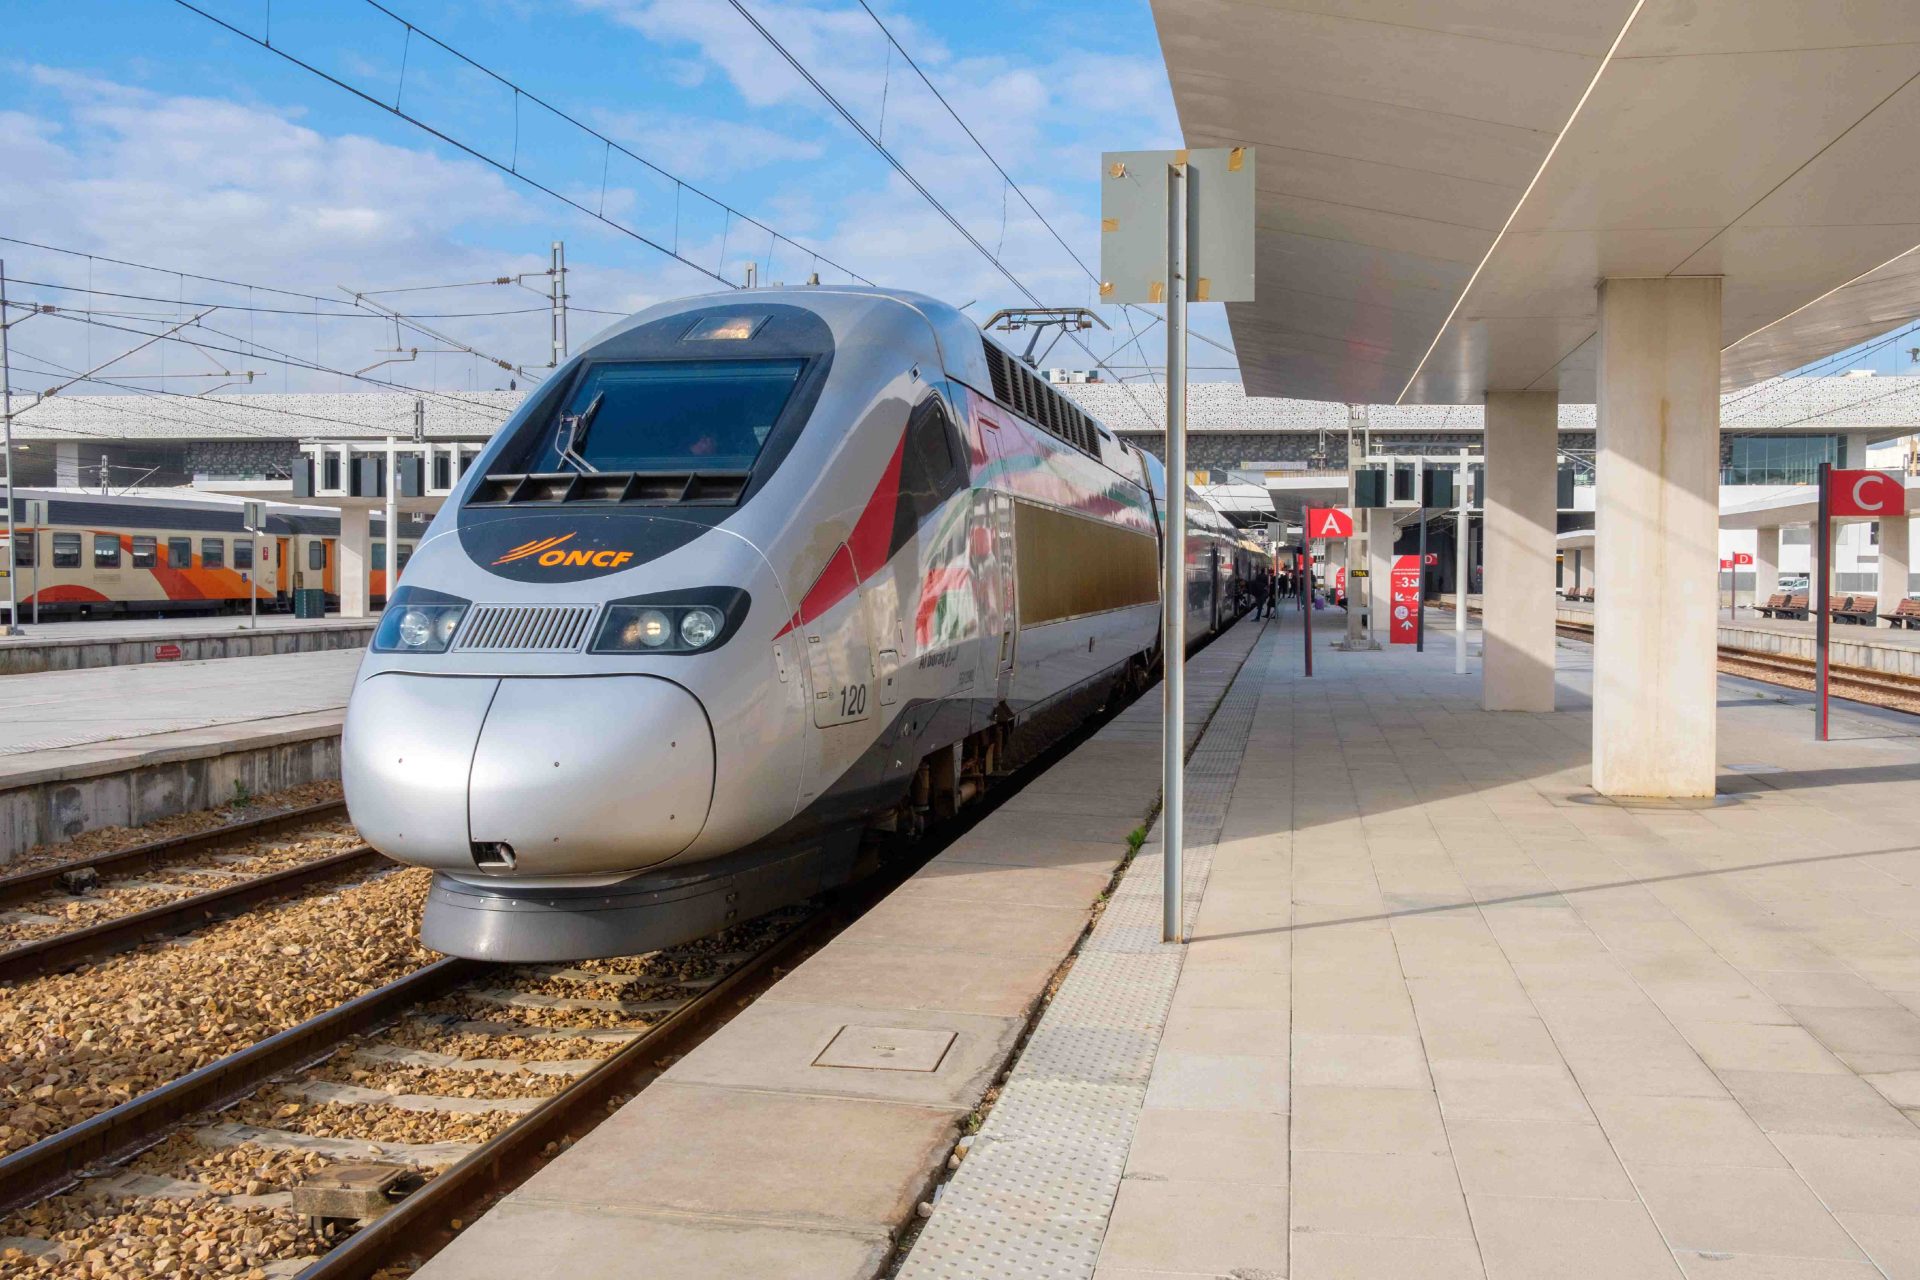 <p><span>Morocco is proud to have Africa's first and only high-speed railway: Al Boraq. The trains link Tangier with Casablanca and can reach the impressive speed of 320 km per hour (198.5 mph).</span></p>